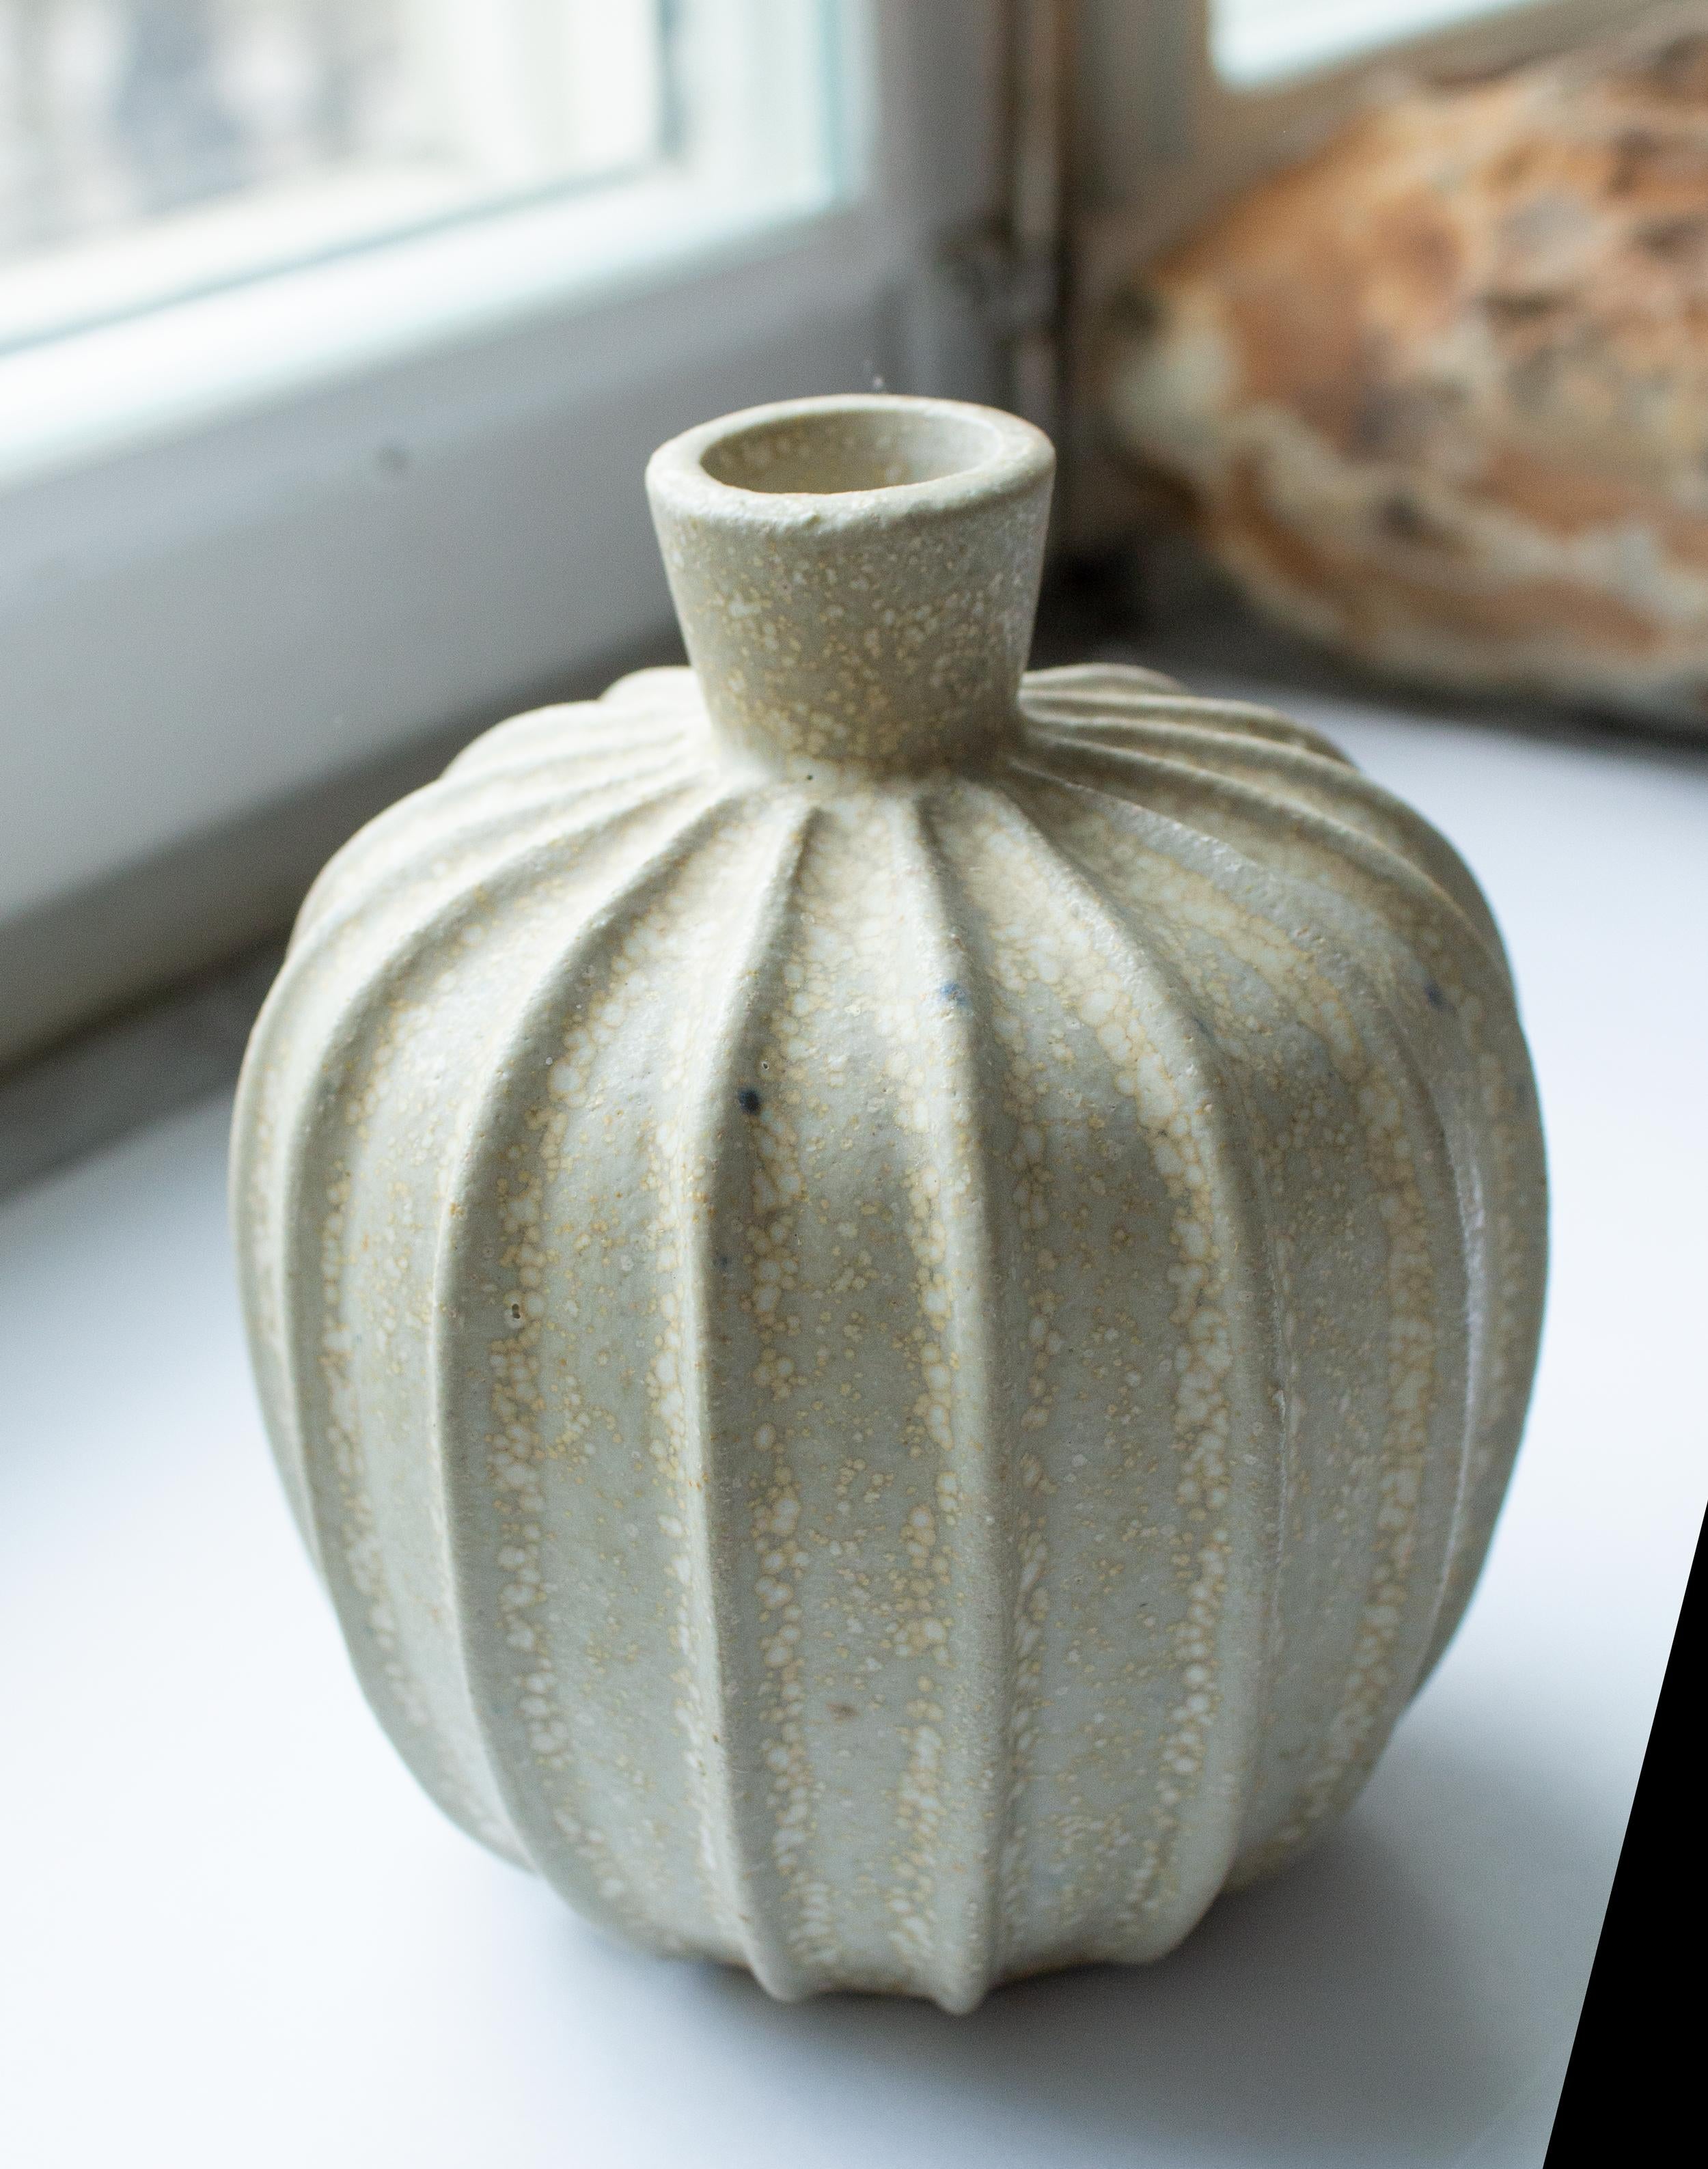 A rare Arne Bang (1901-1983, stoneware vase with ribbed corpus decorated with sand-colored eggshell glaze body. Signed with Bang’s monogram on the underside, No. 2. Perfect condition. Other designers of the same period includes Axel Salto, Wilhelm